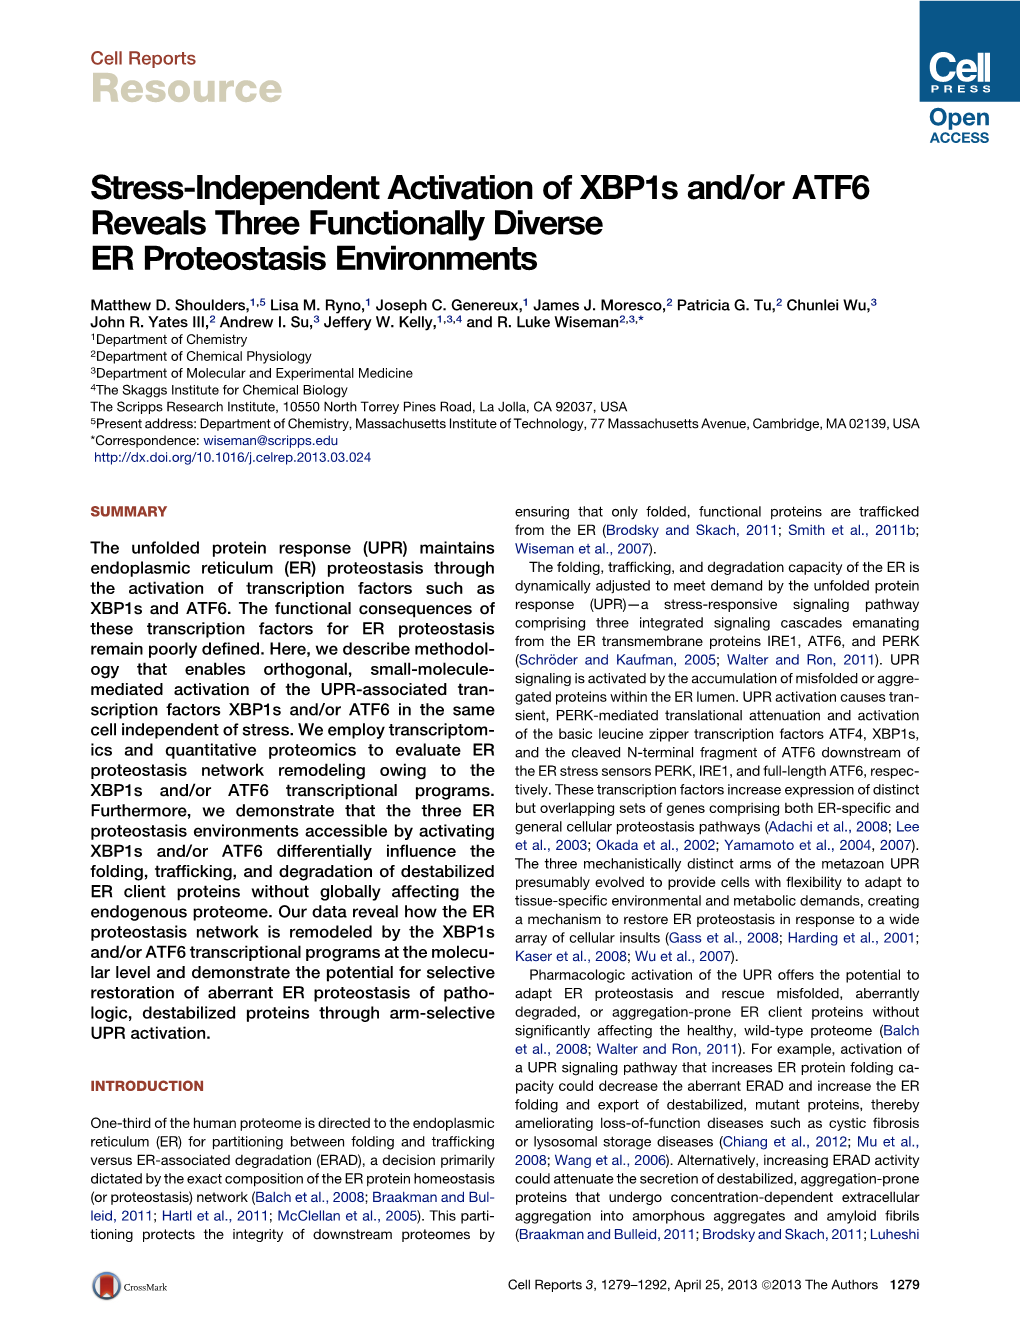 Stress-Independent Activation of Xbp1s And/Or ATF6 Reveals Three Functionally Diverse ER Proteostasis Environments